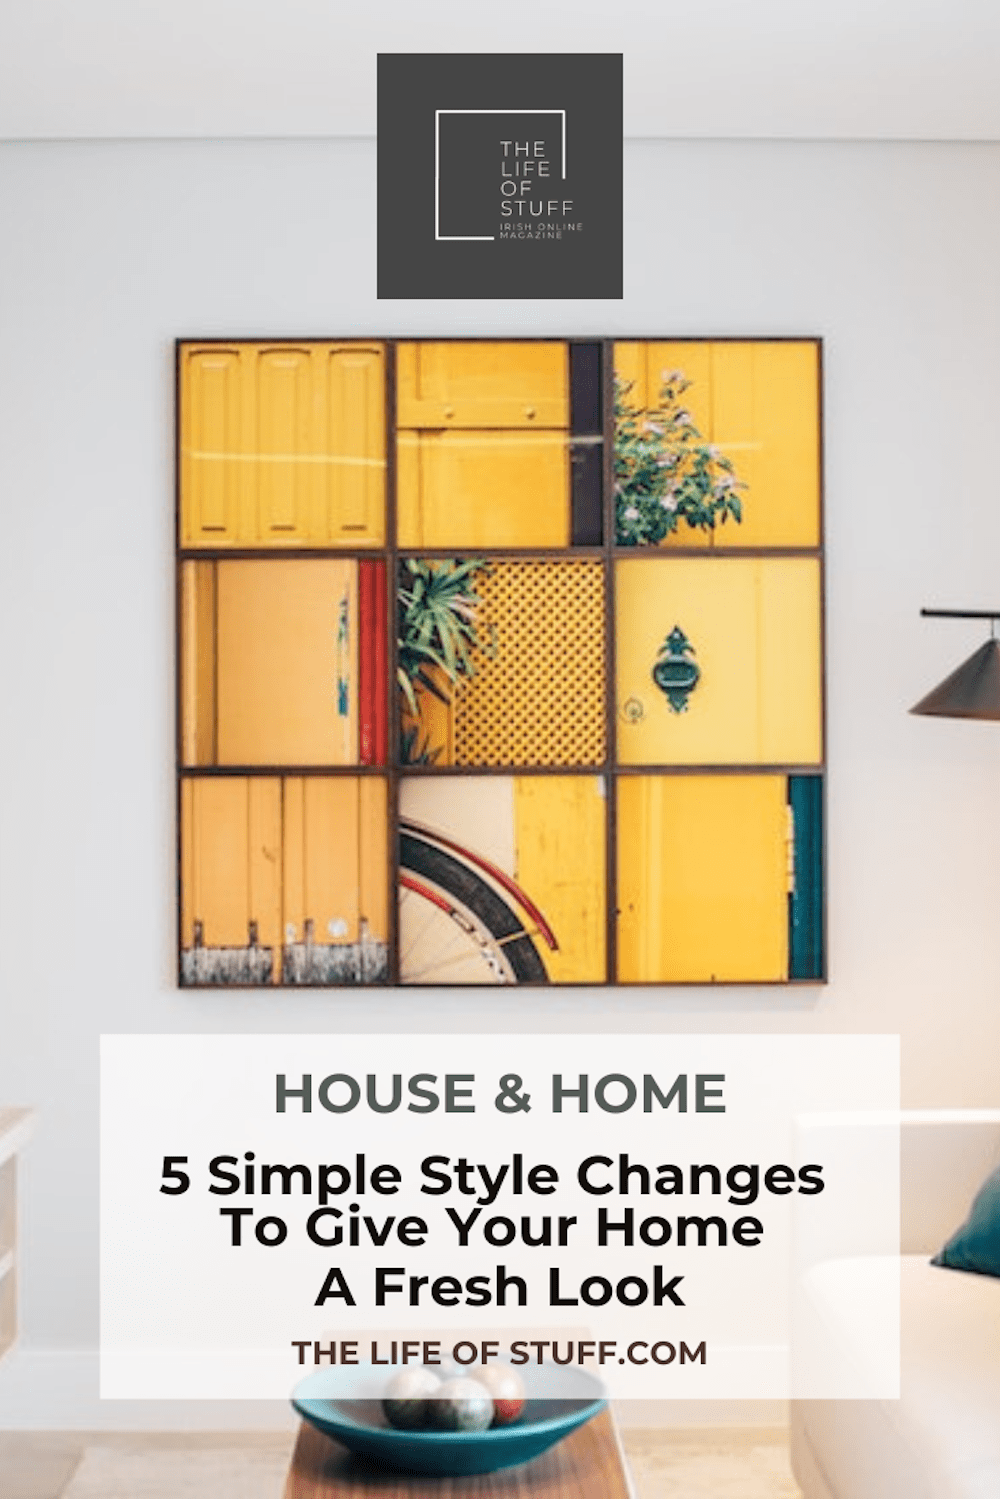 5 Simple Style Changes To Give Your Home A Fresh Look - The Life of Stuff - Irish online Magazine